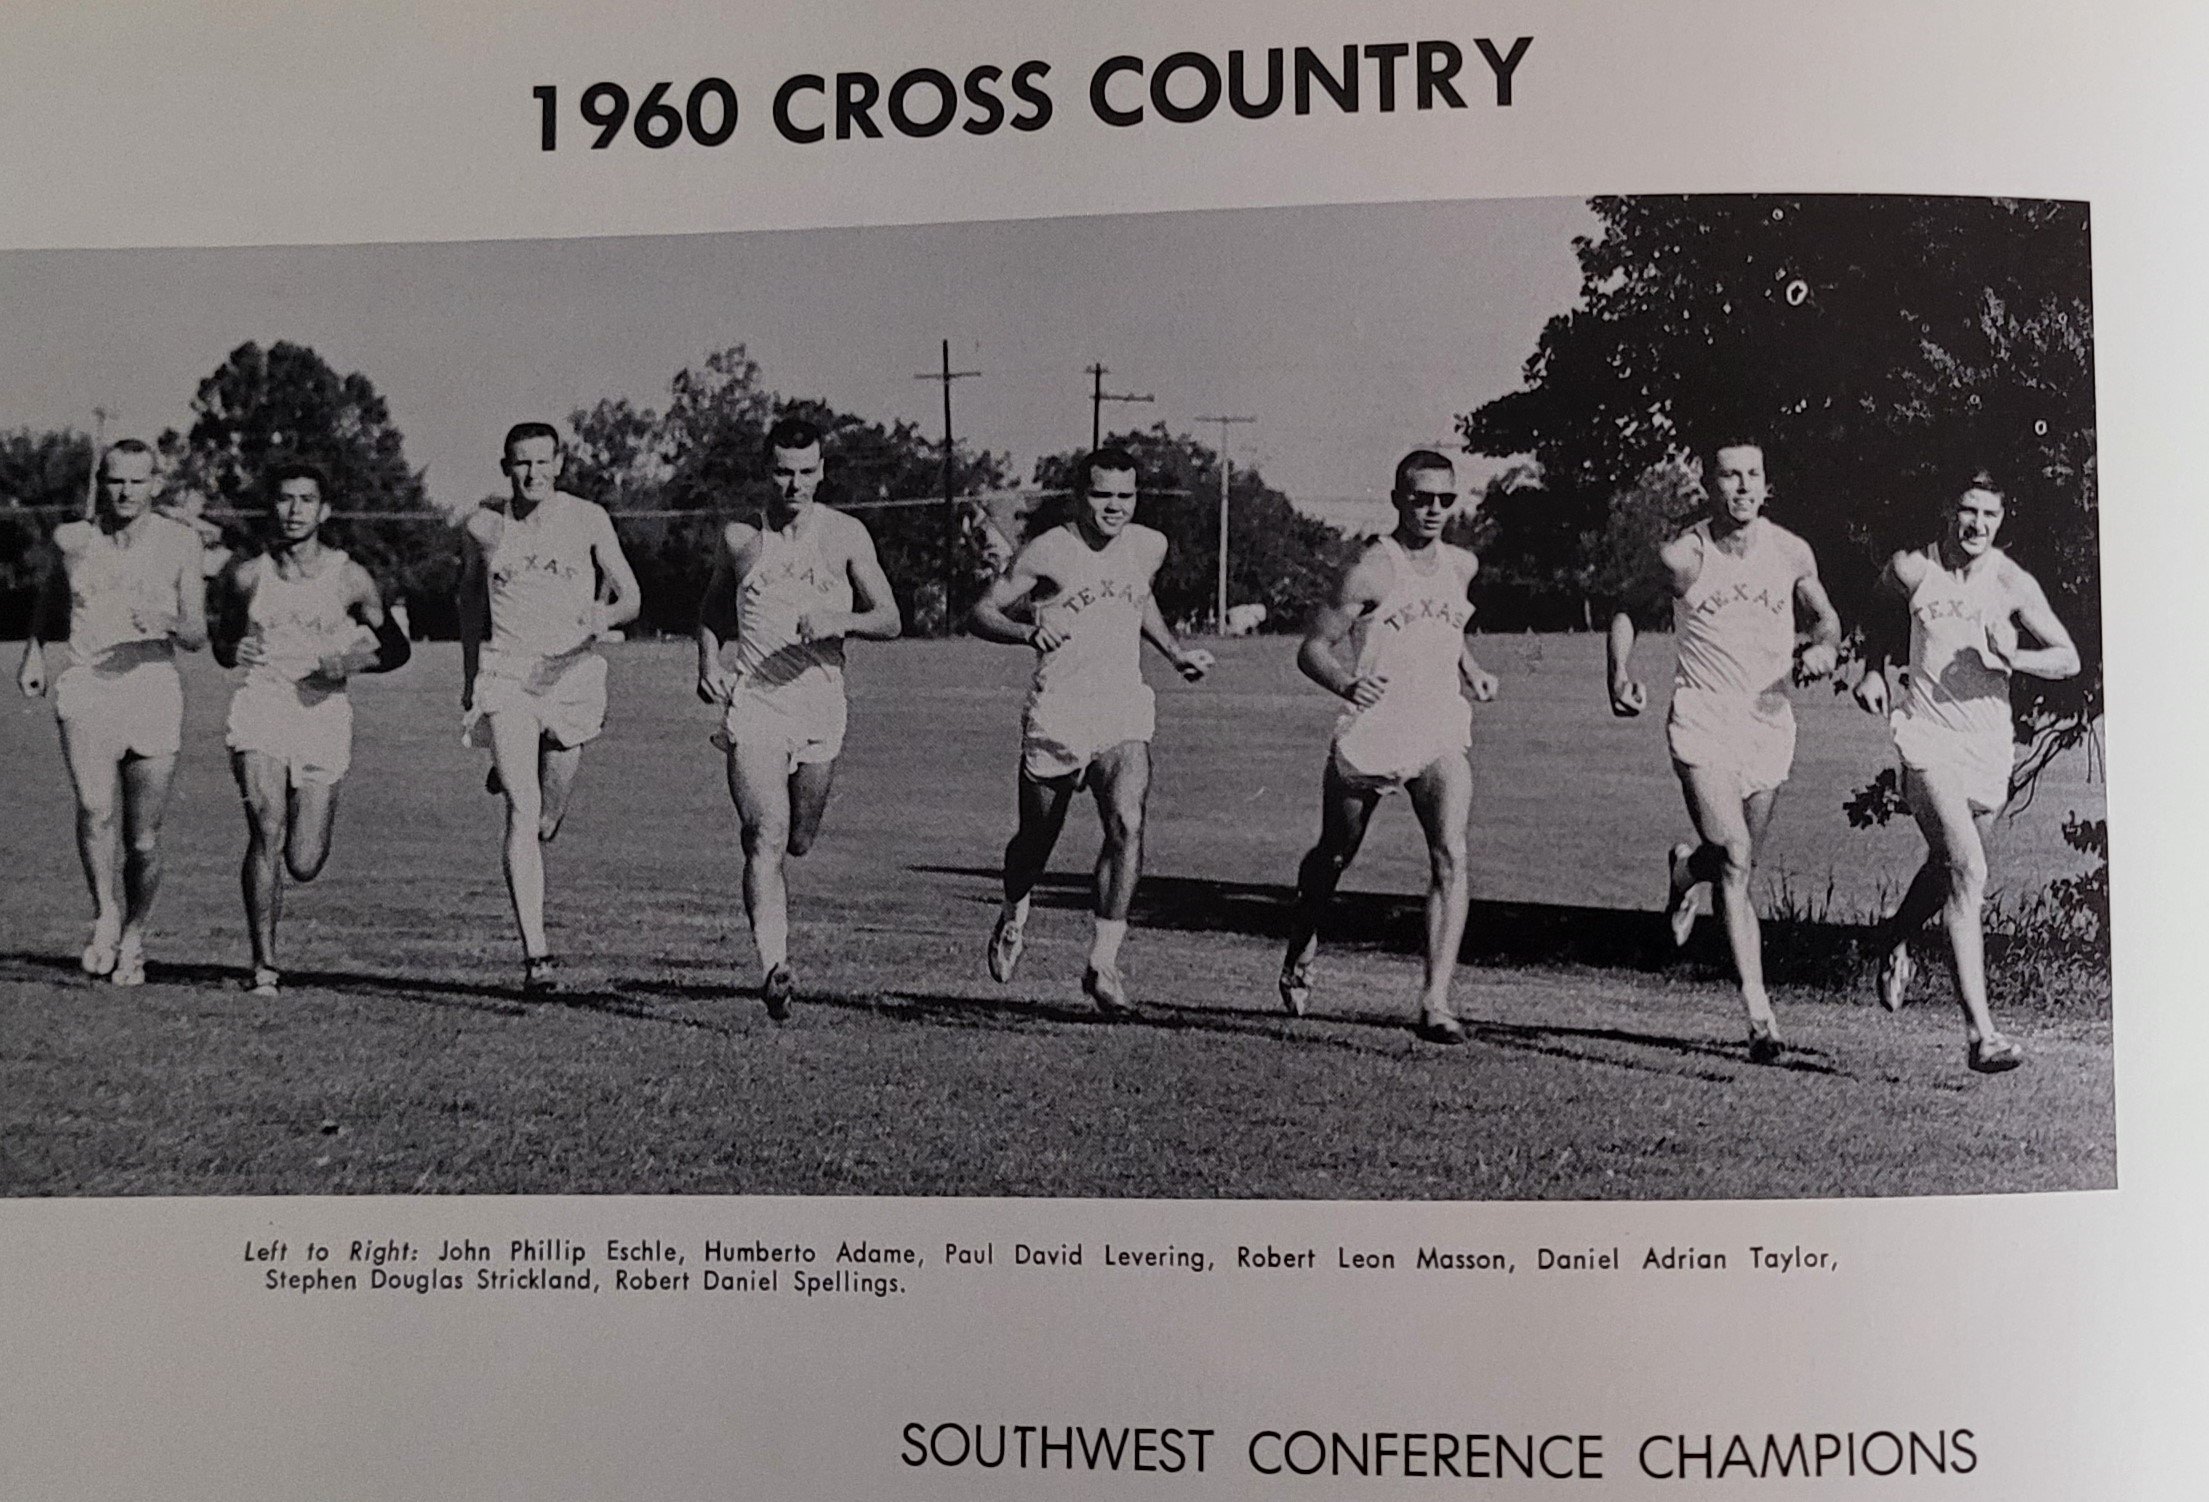  1960-1961 cross country  Eschle, Adame, Levering, Masson, Taylor, Strickland, Spellings 